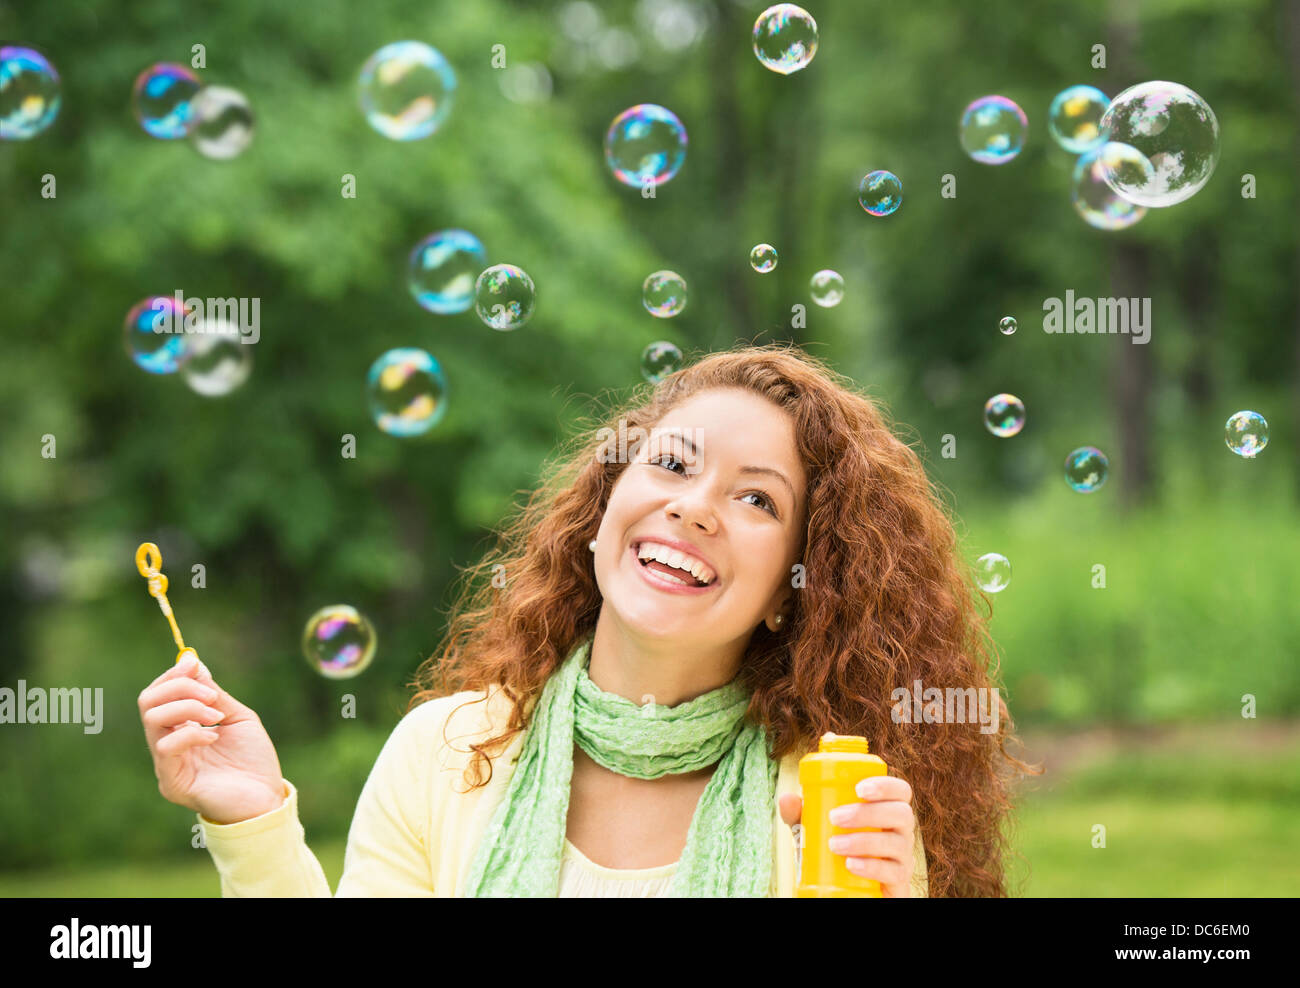 Young woman blowing bubbles in park Banque D'Images